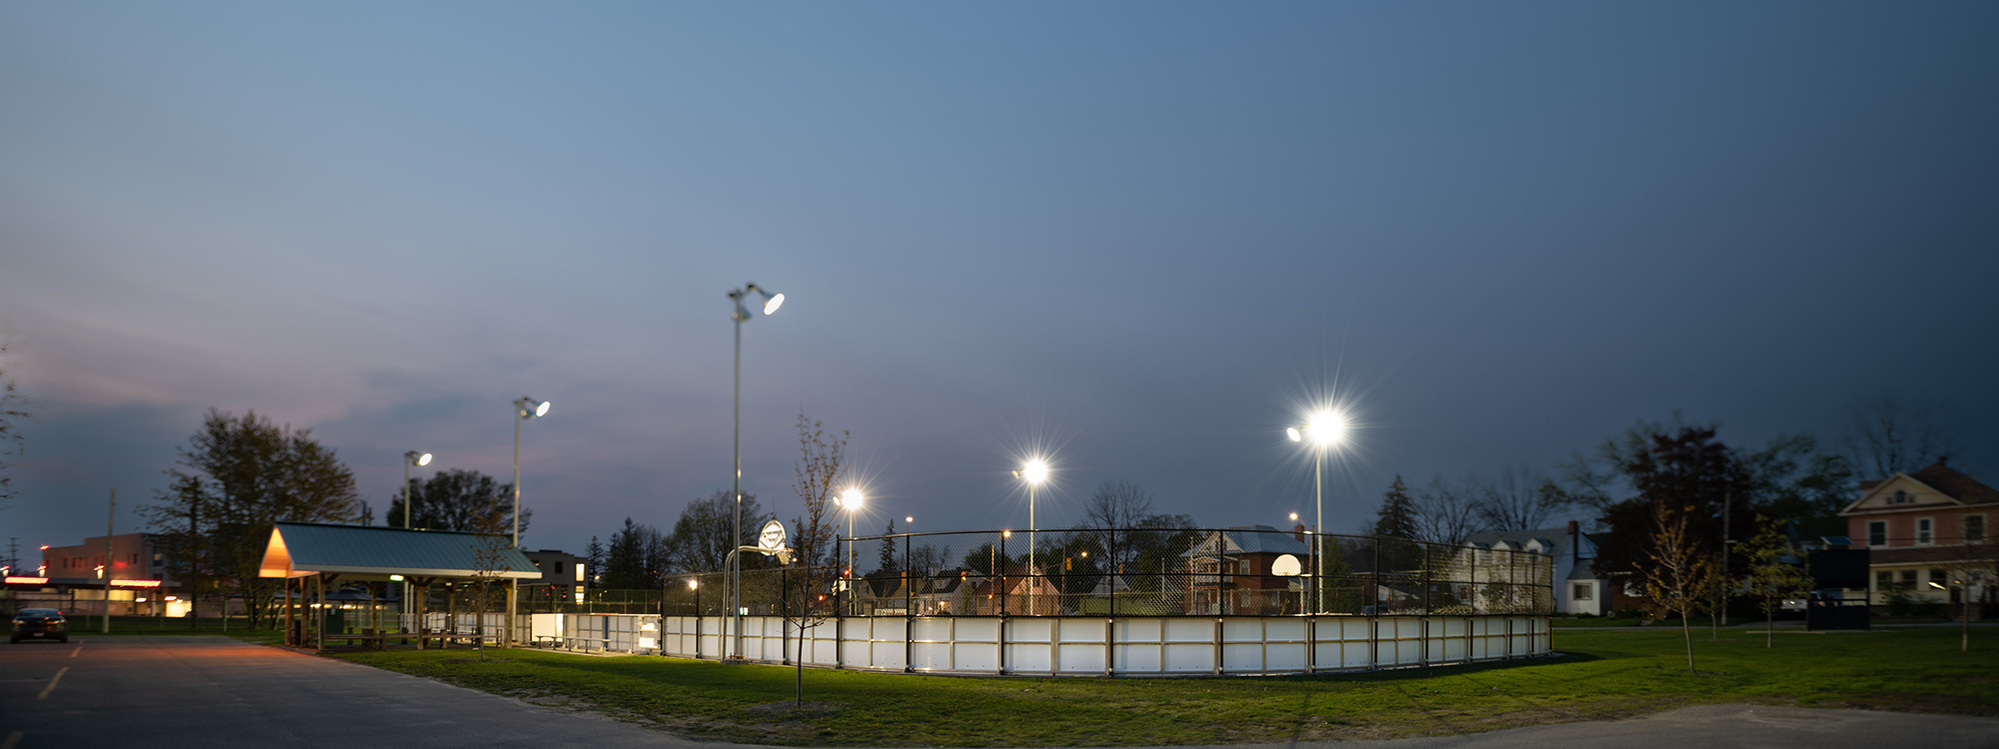 Smiths Falls Ontario Rink of Dreams during blue hour by architectural photographer Frank Fenn of IDEA3 Photography